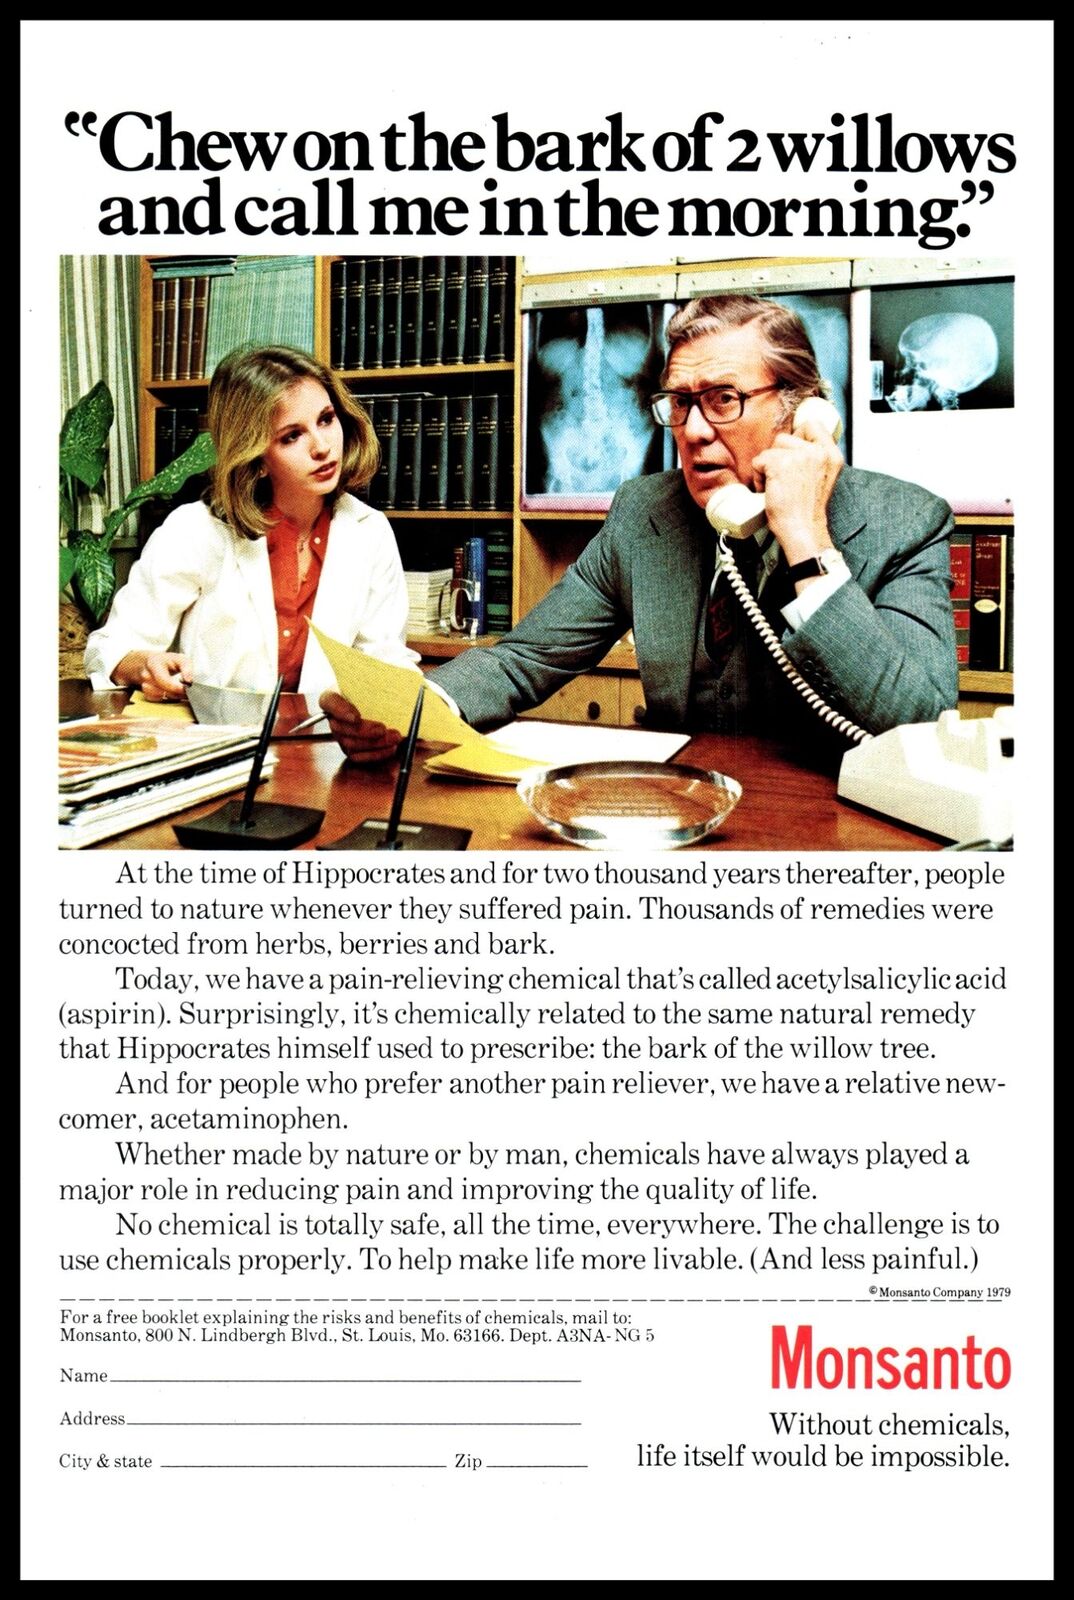 1980 Monsanto Impossible Without Chemicals Vintage Print Ad Blonde Lab Wall Art